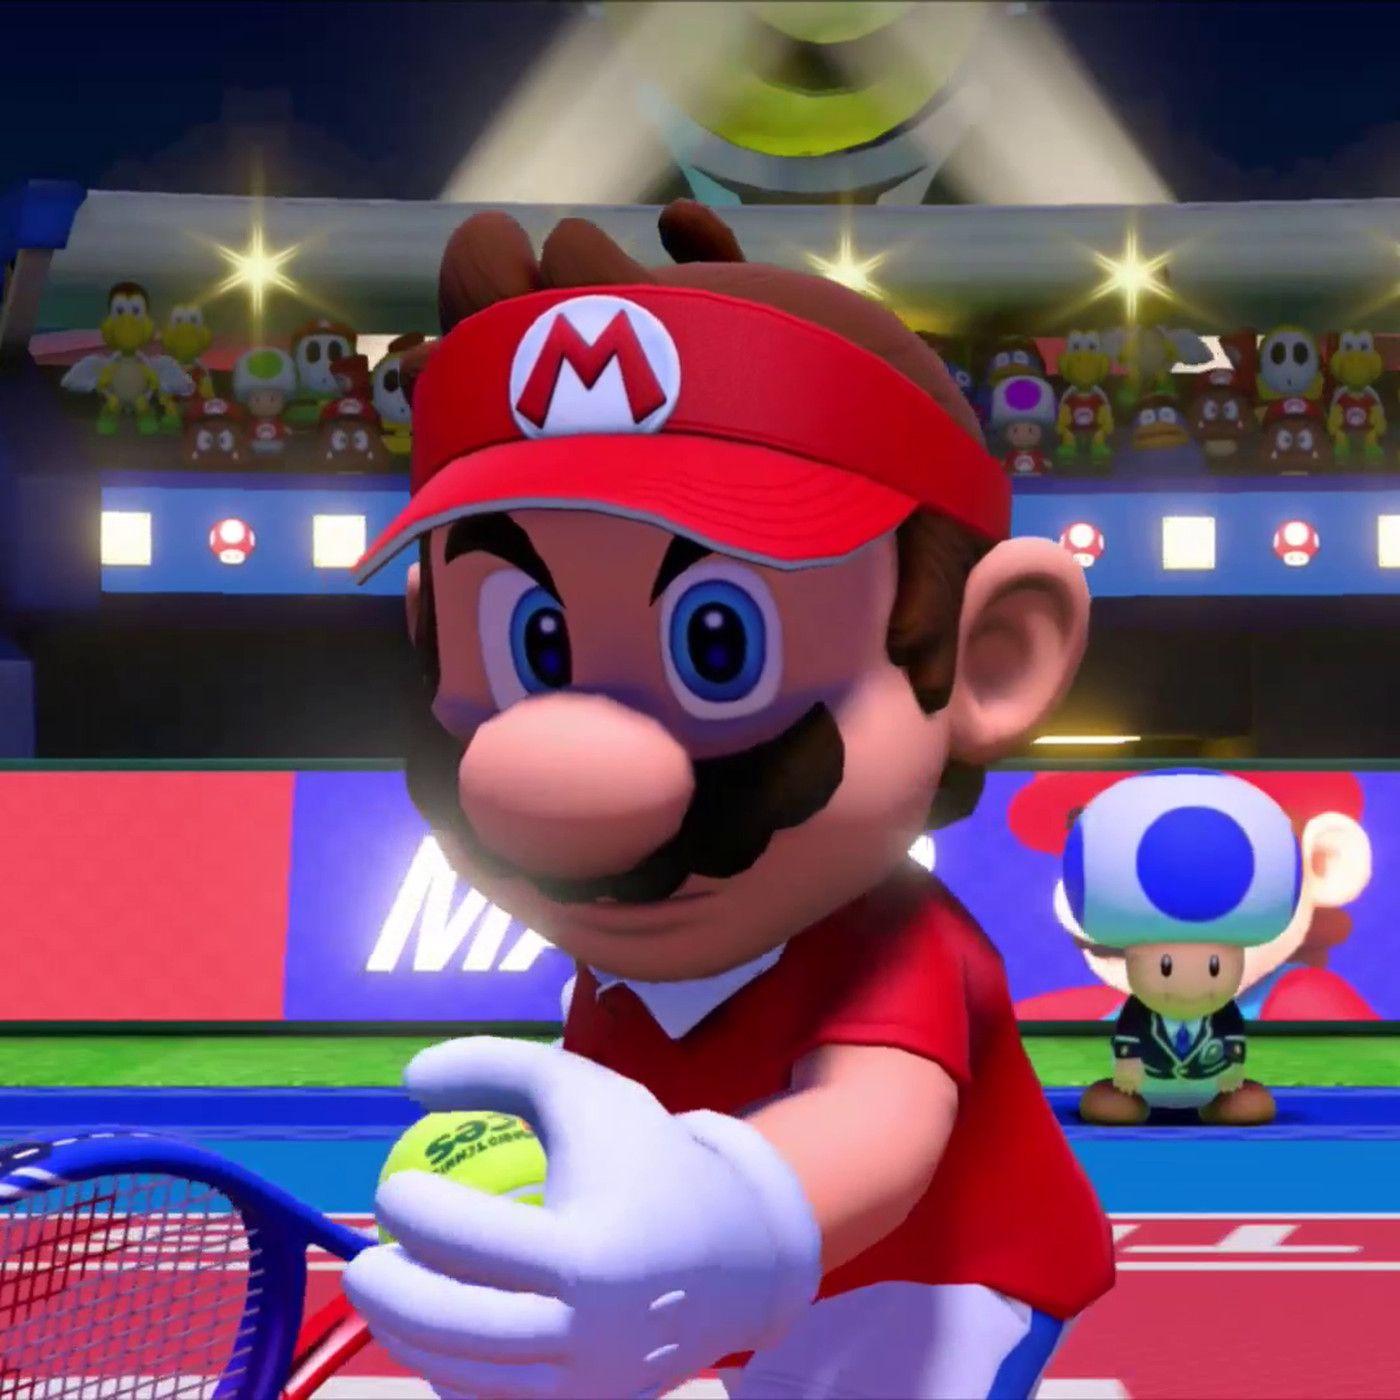 Mario Tennis Aces is getting three new characters this fall